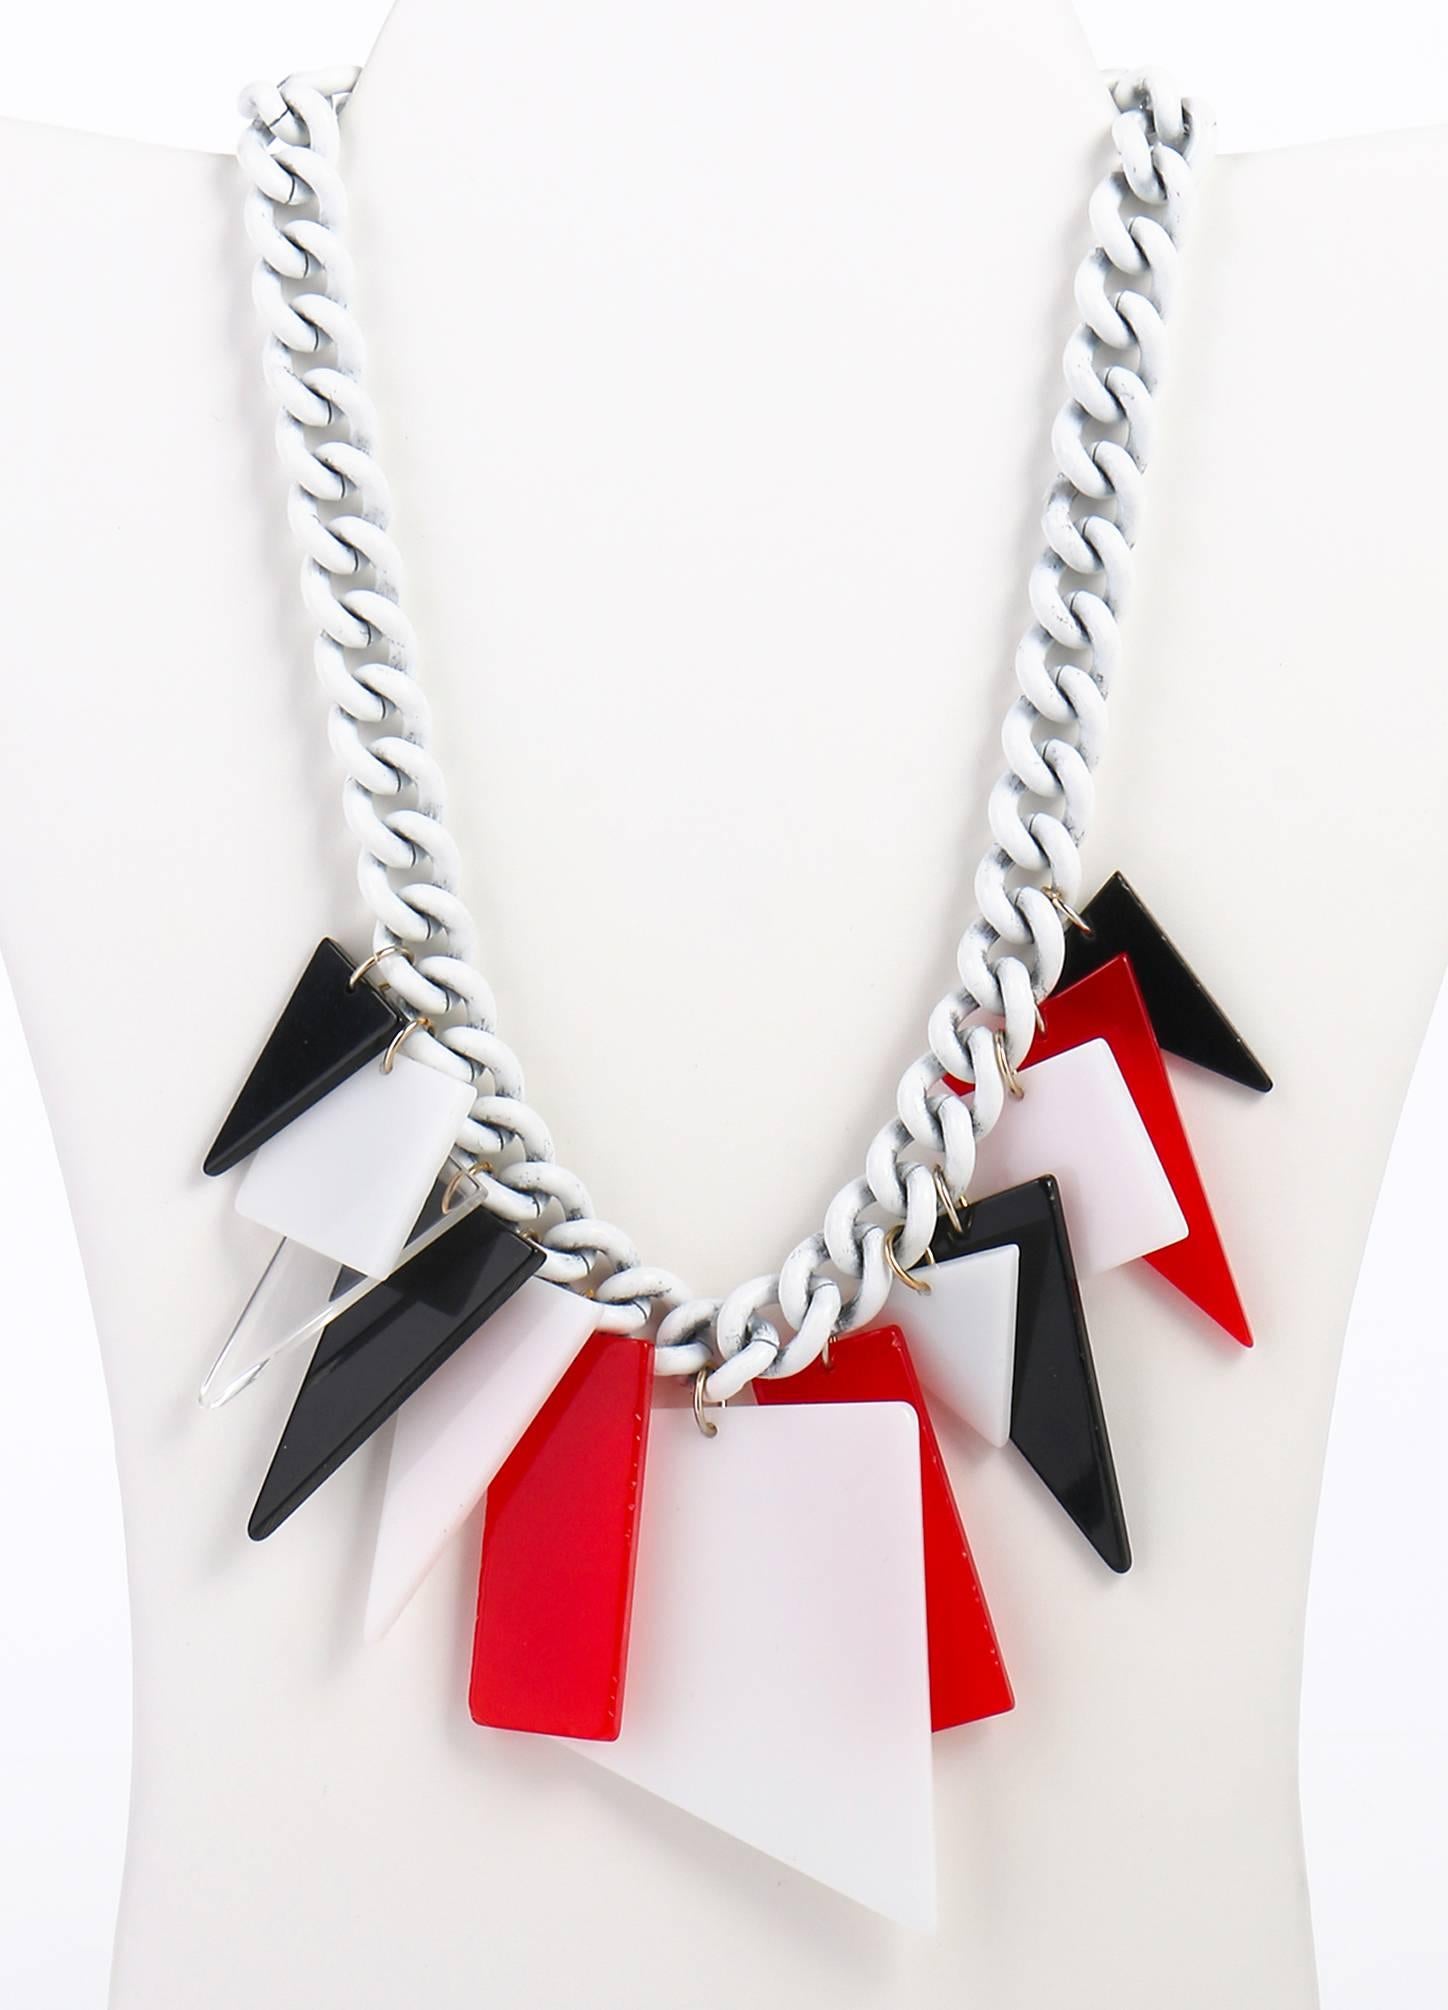 One of a kind vintage c.1960's Mod red, white, clear and black large acrylic/lucite geometric shaped dangles chain necklace. Dangles attached to white enamel coated metal large link chain. The 13 various geometric shaped dangles range from